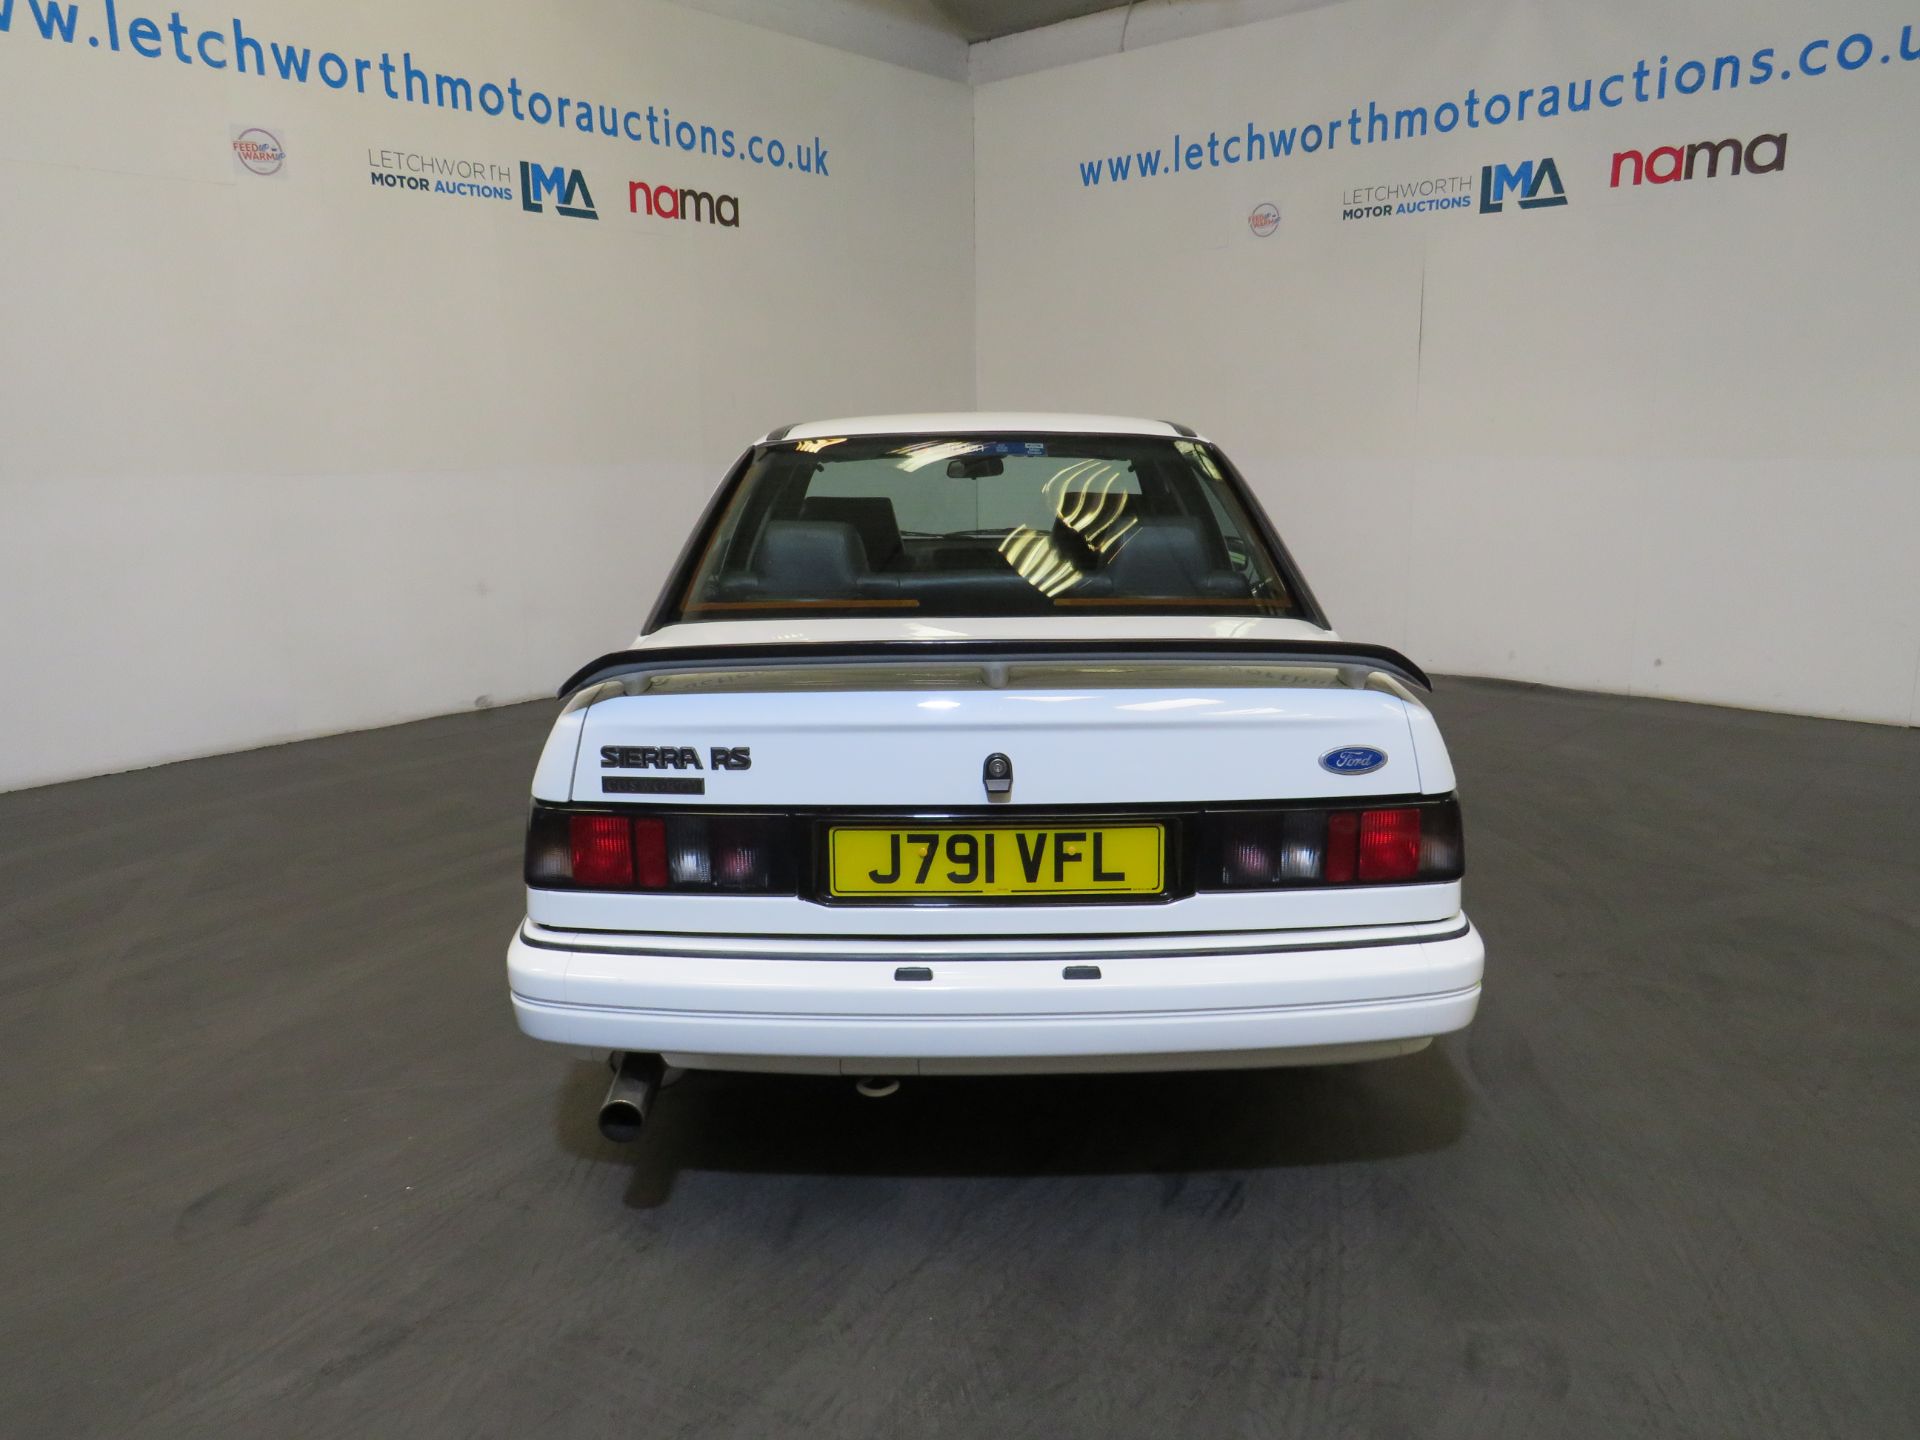 1991 Ford Sierra Sapphire Cosworth 4x4 - 1993cc - Image 5 of 19